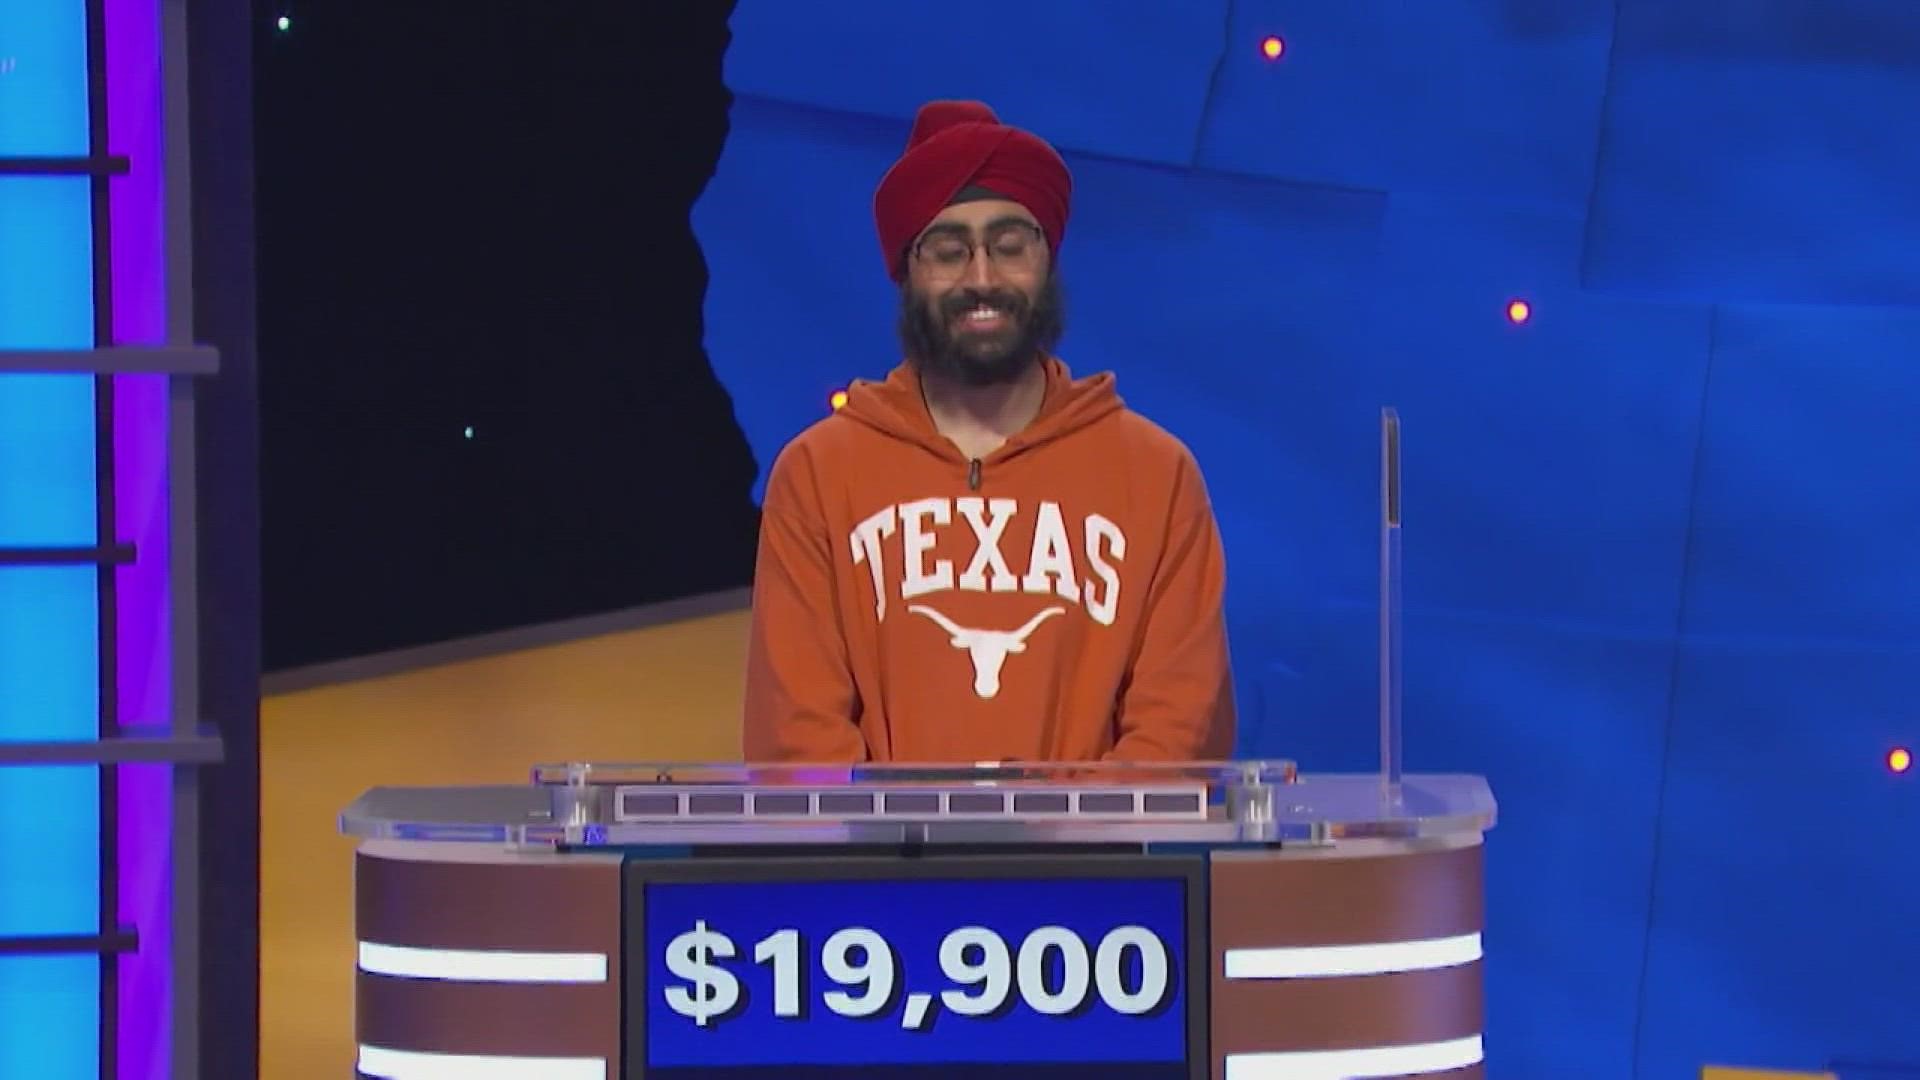 Plano's Jaskaran Singh attends the University of Texas at Austin and is one of six semifinalists left in the Jeopardy! National College Championship.